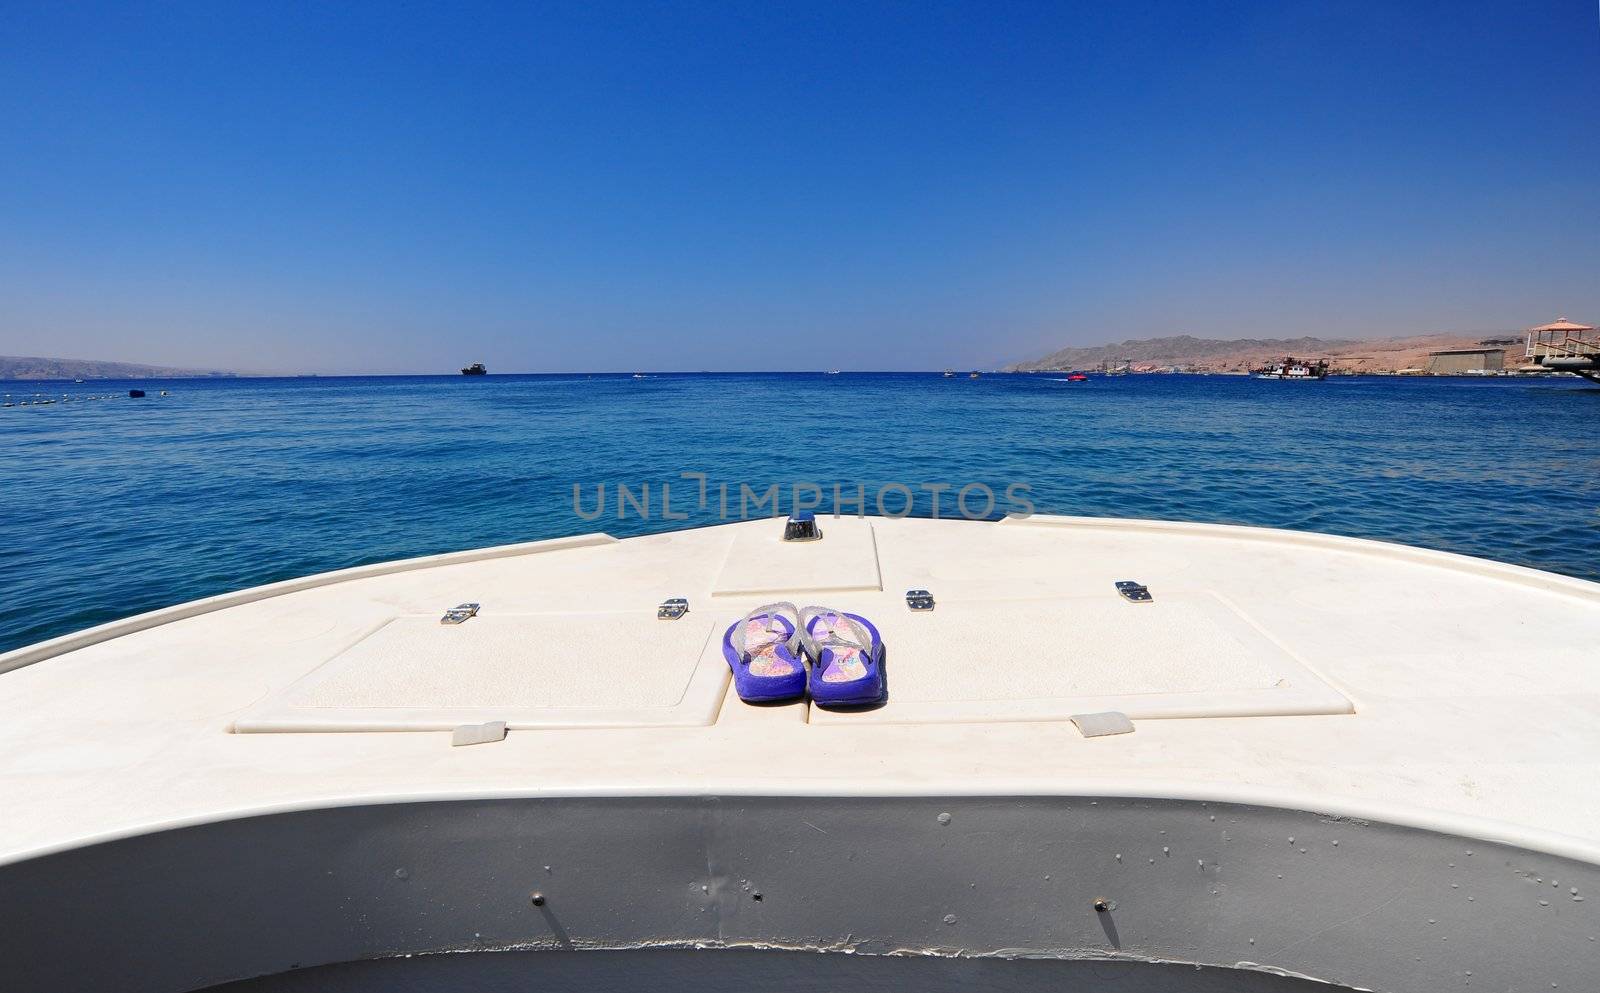 Prow Of White Boat With Flip-flops In The Red Sea